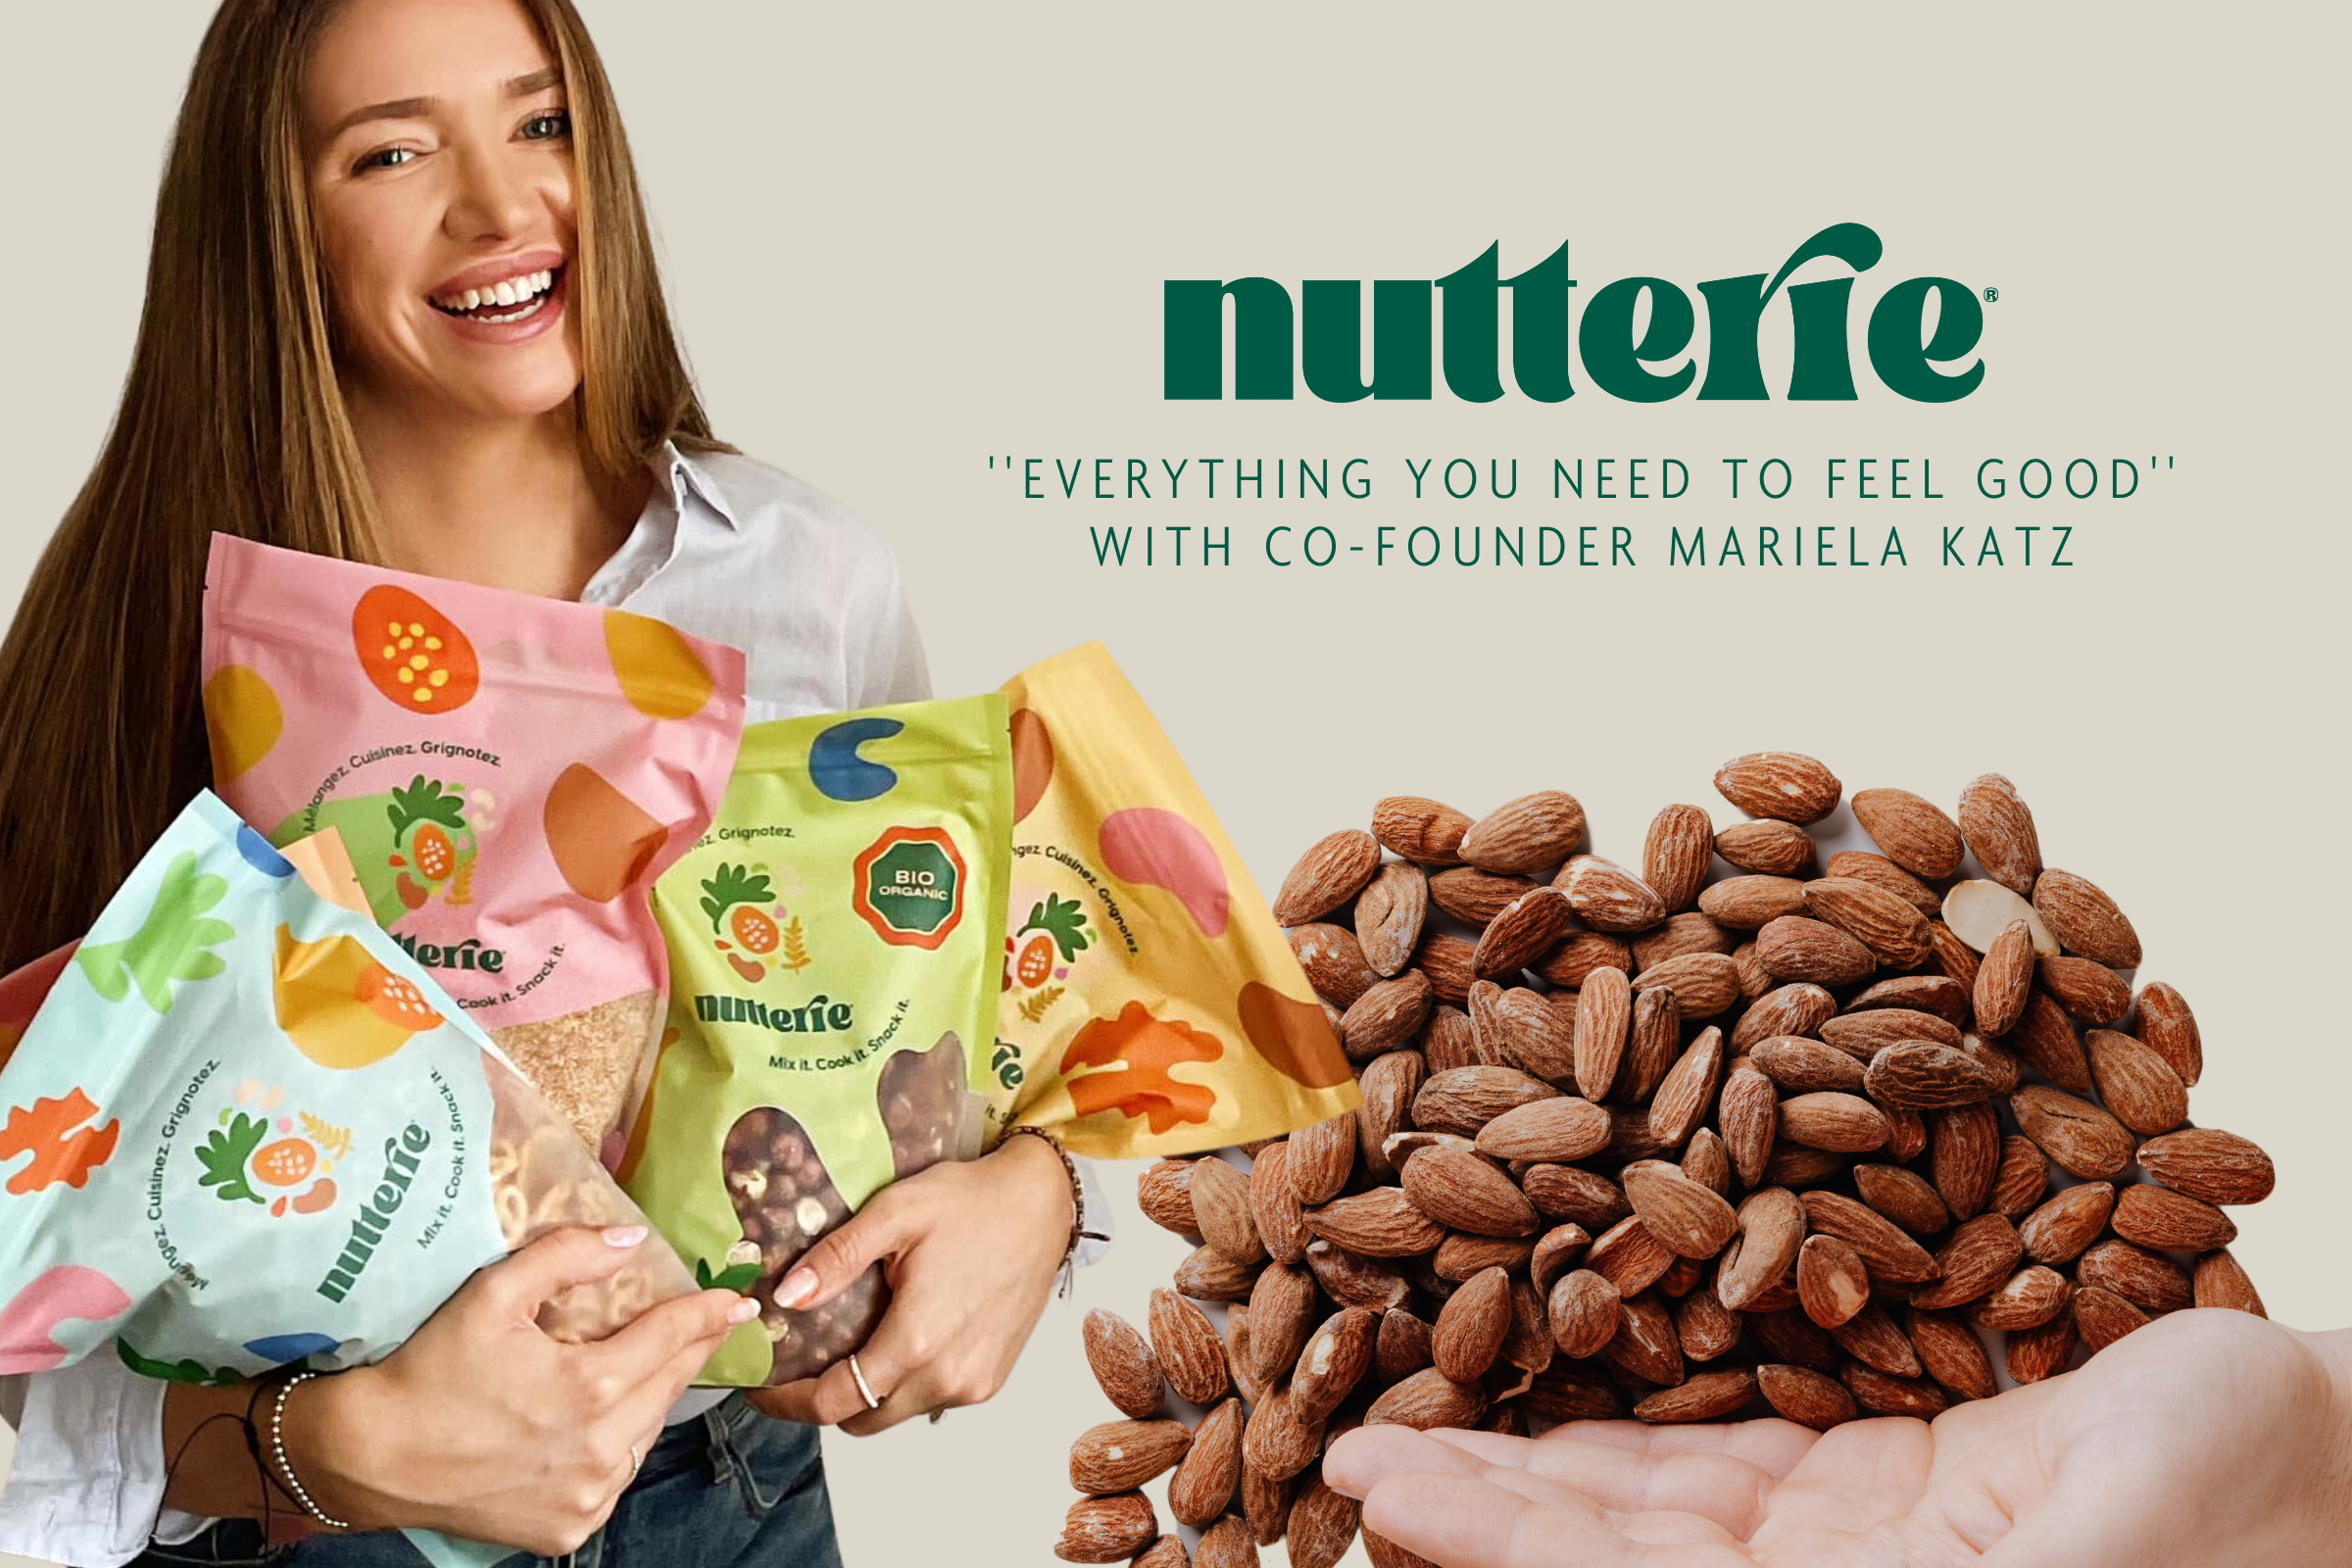 Everything You Need to Feel Good - Nutterie